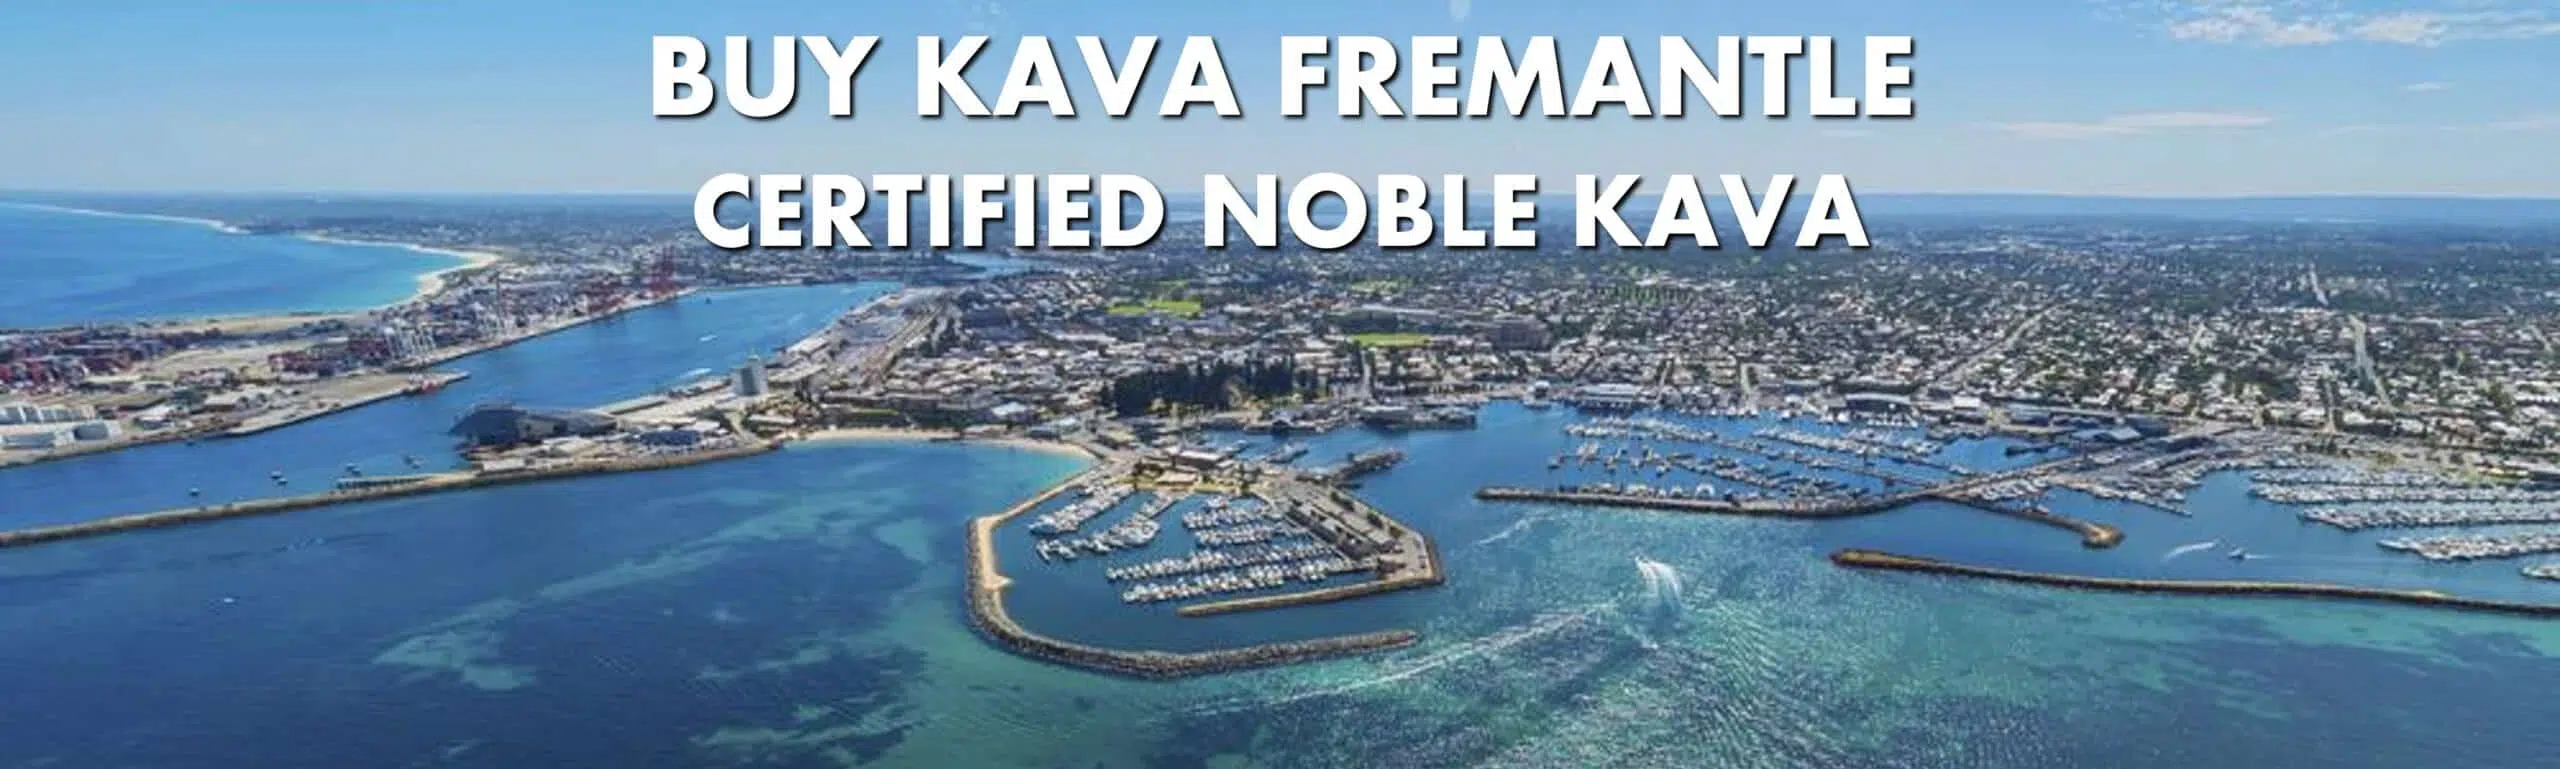 Aerial view of Fremantle with the description - "Buy Kava in Fremantle"